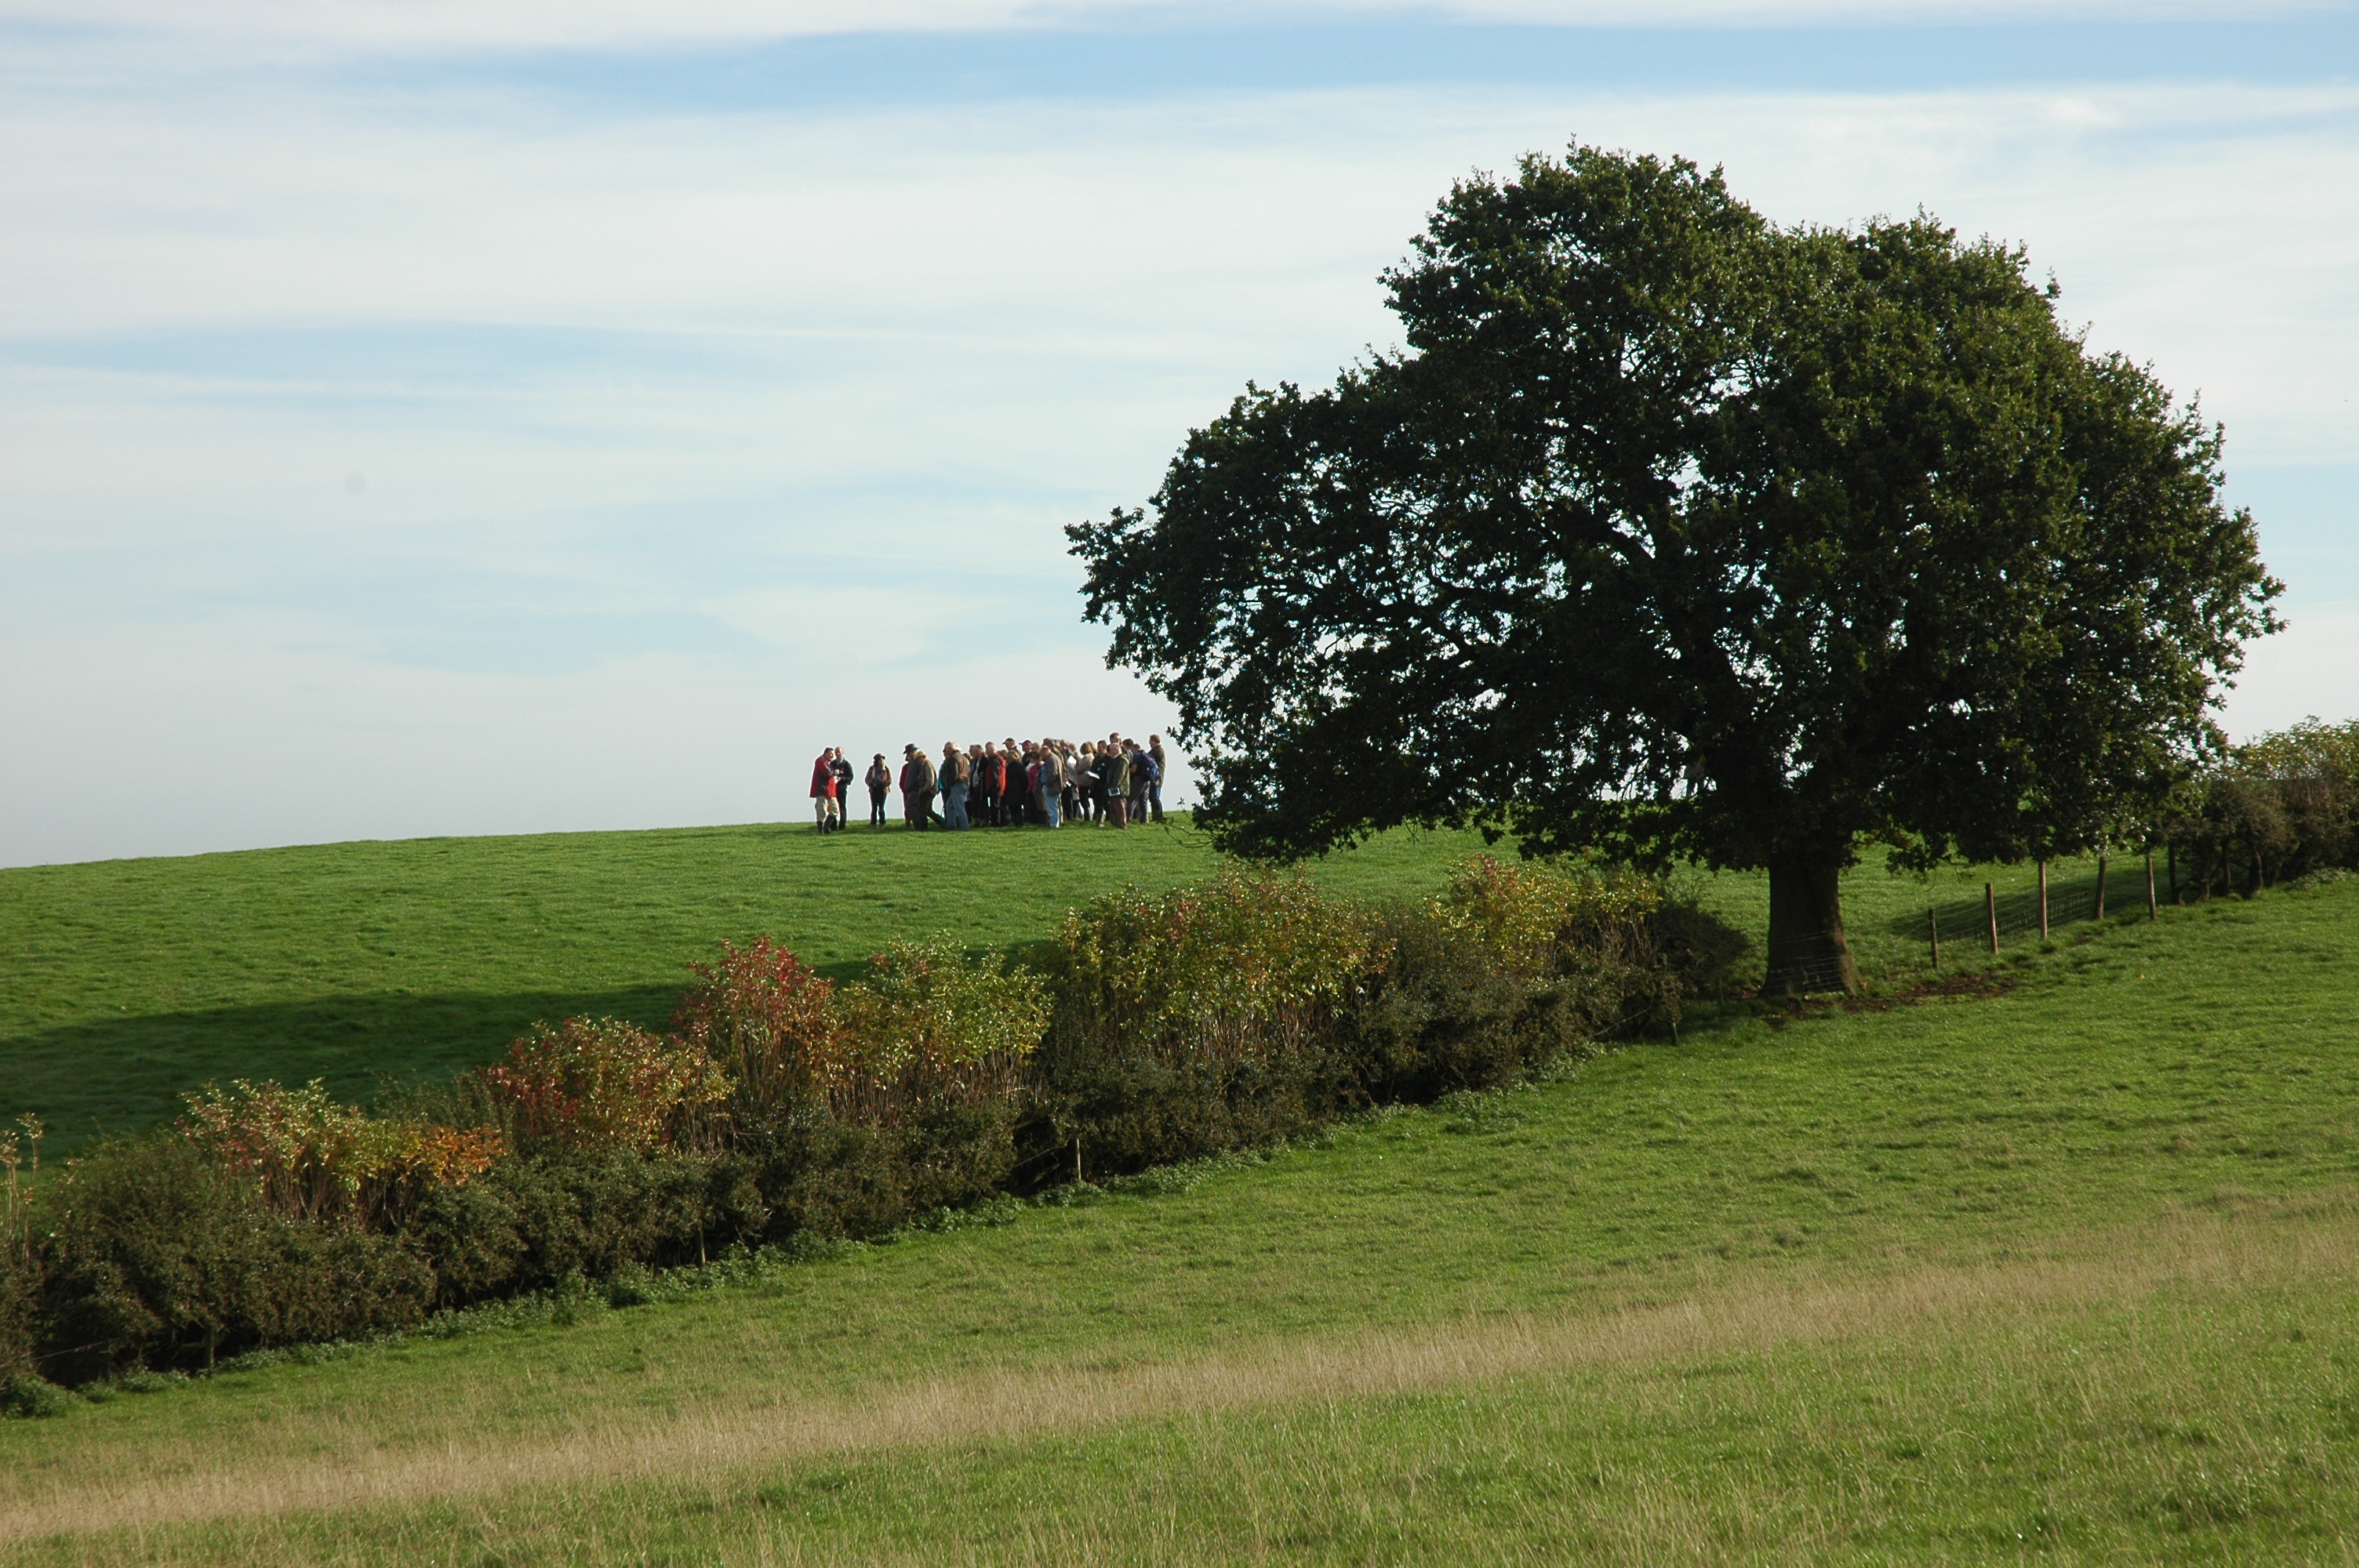 Members of the Guild of Battlefield Guides enjoy a superb view over Naseby battlefield